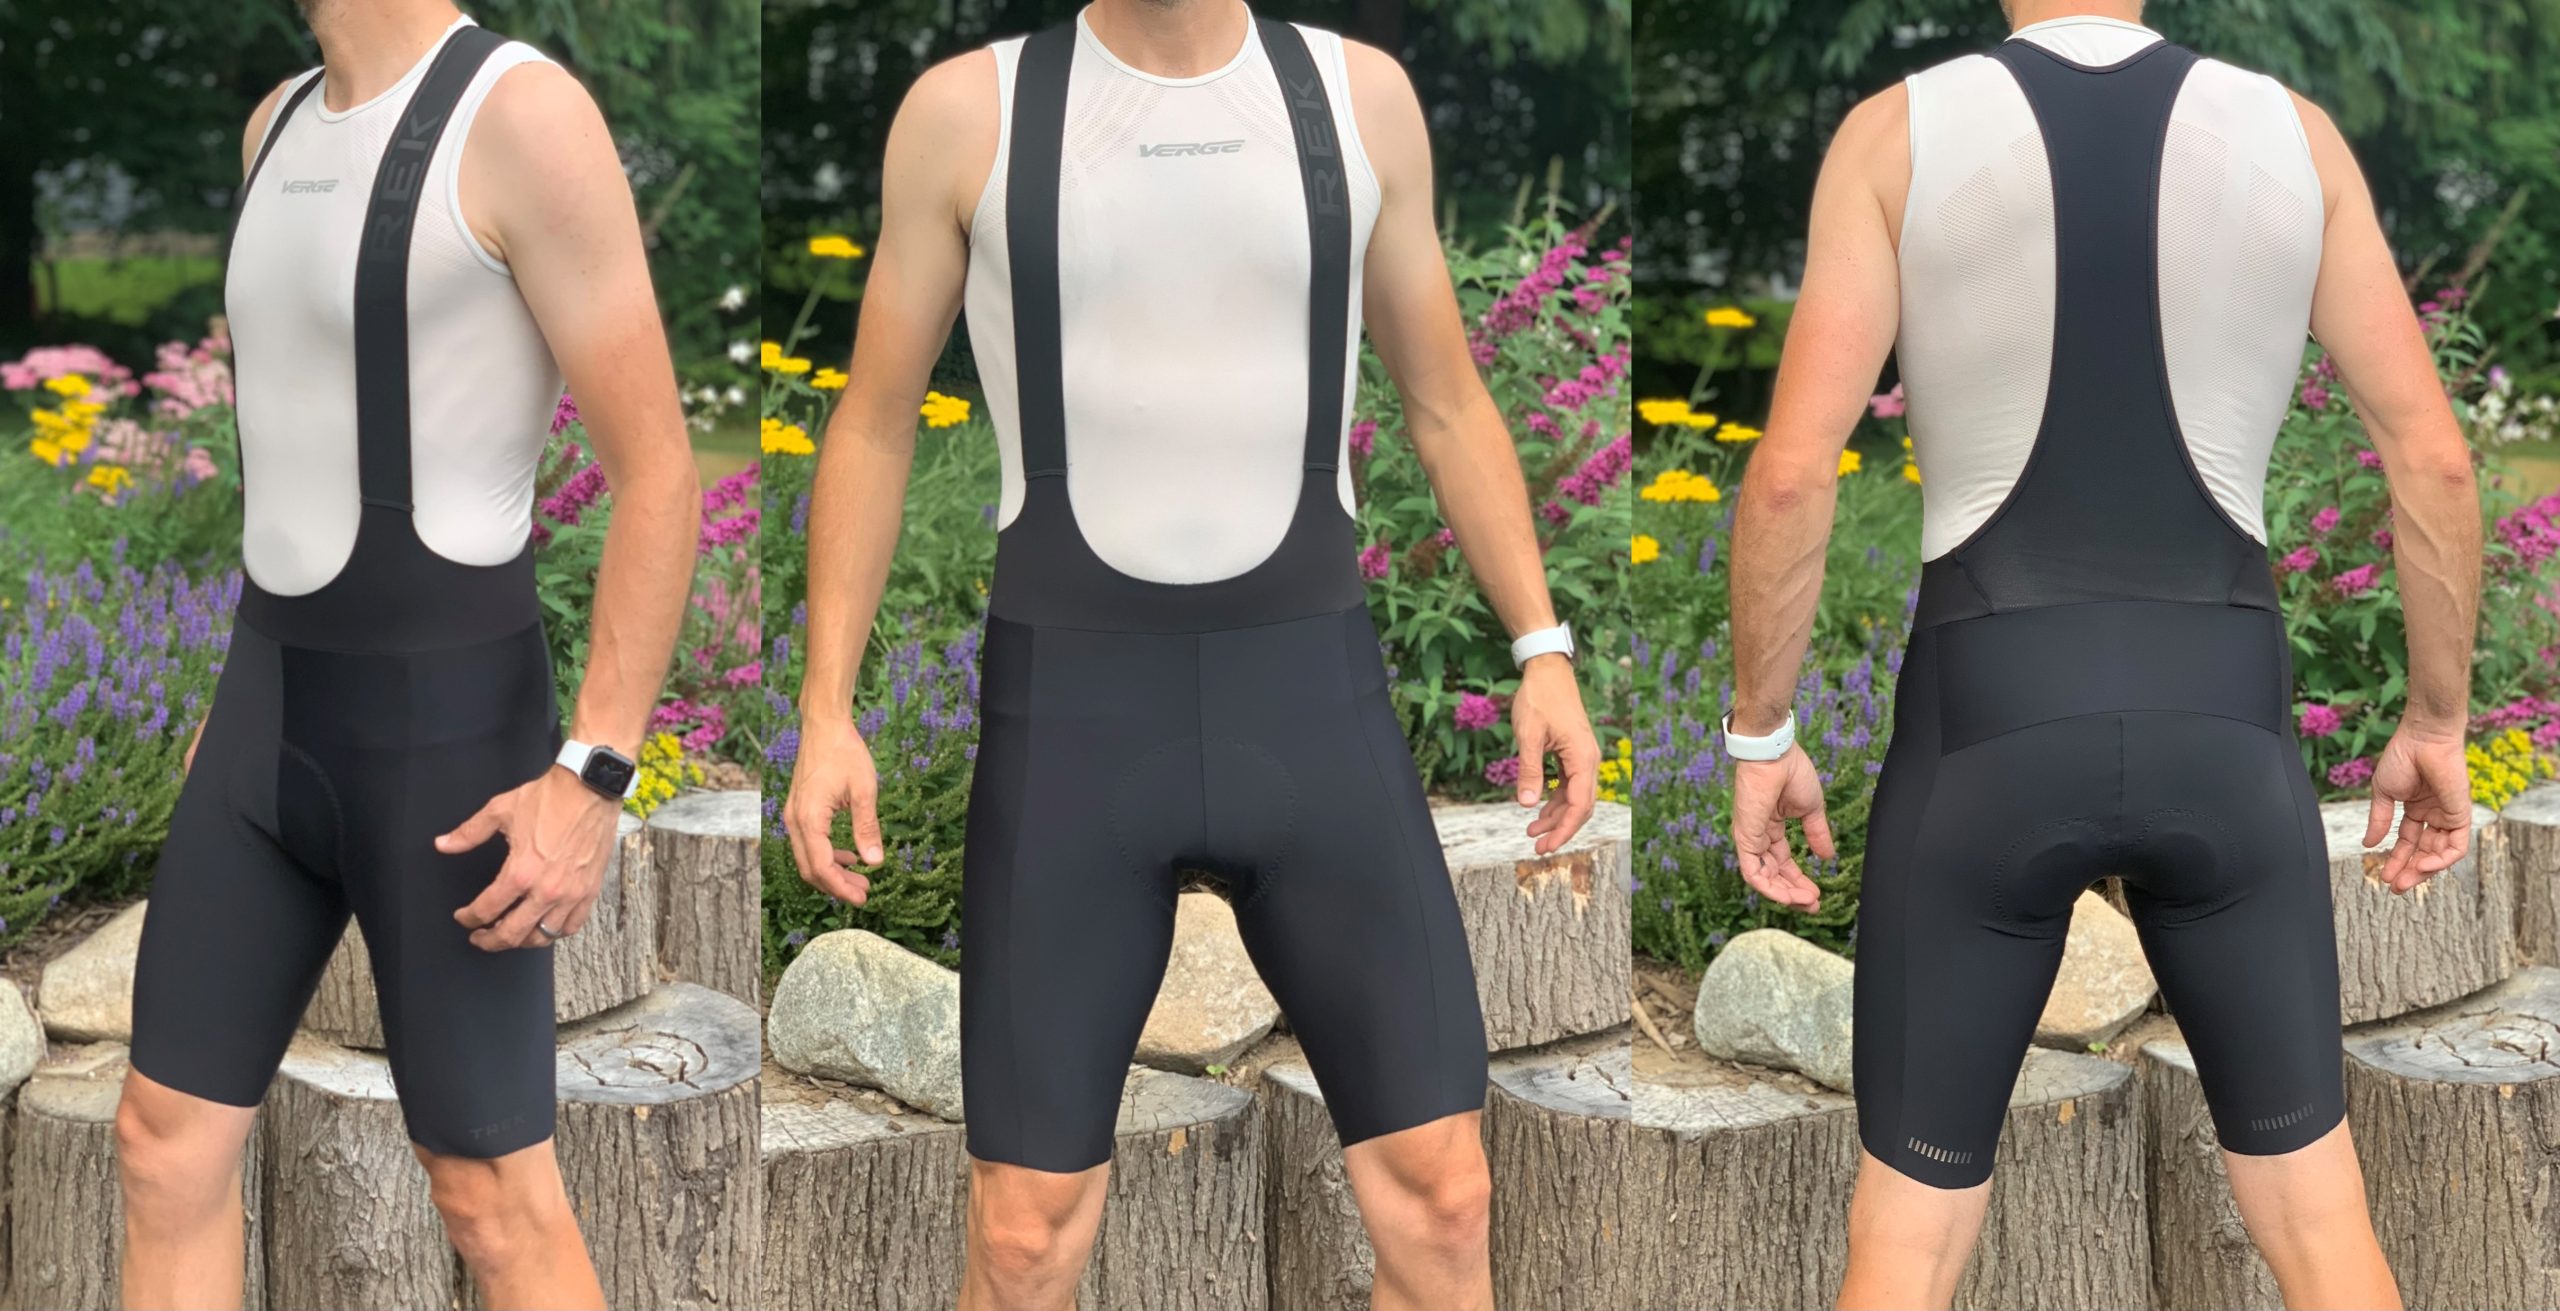 What Are The Best Bicycle Bib Shorts